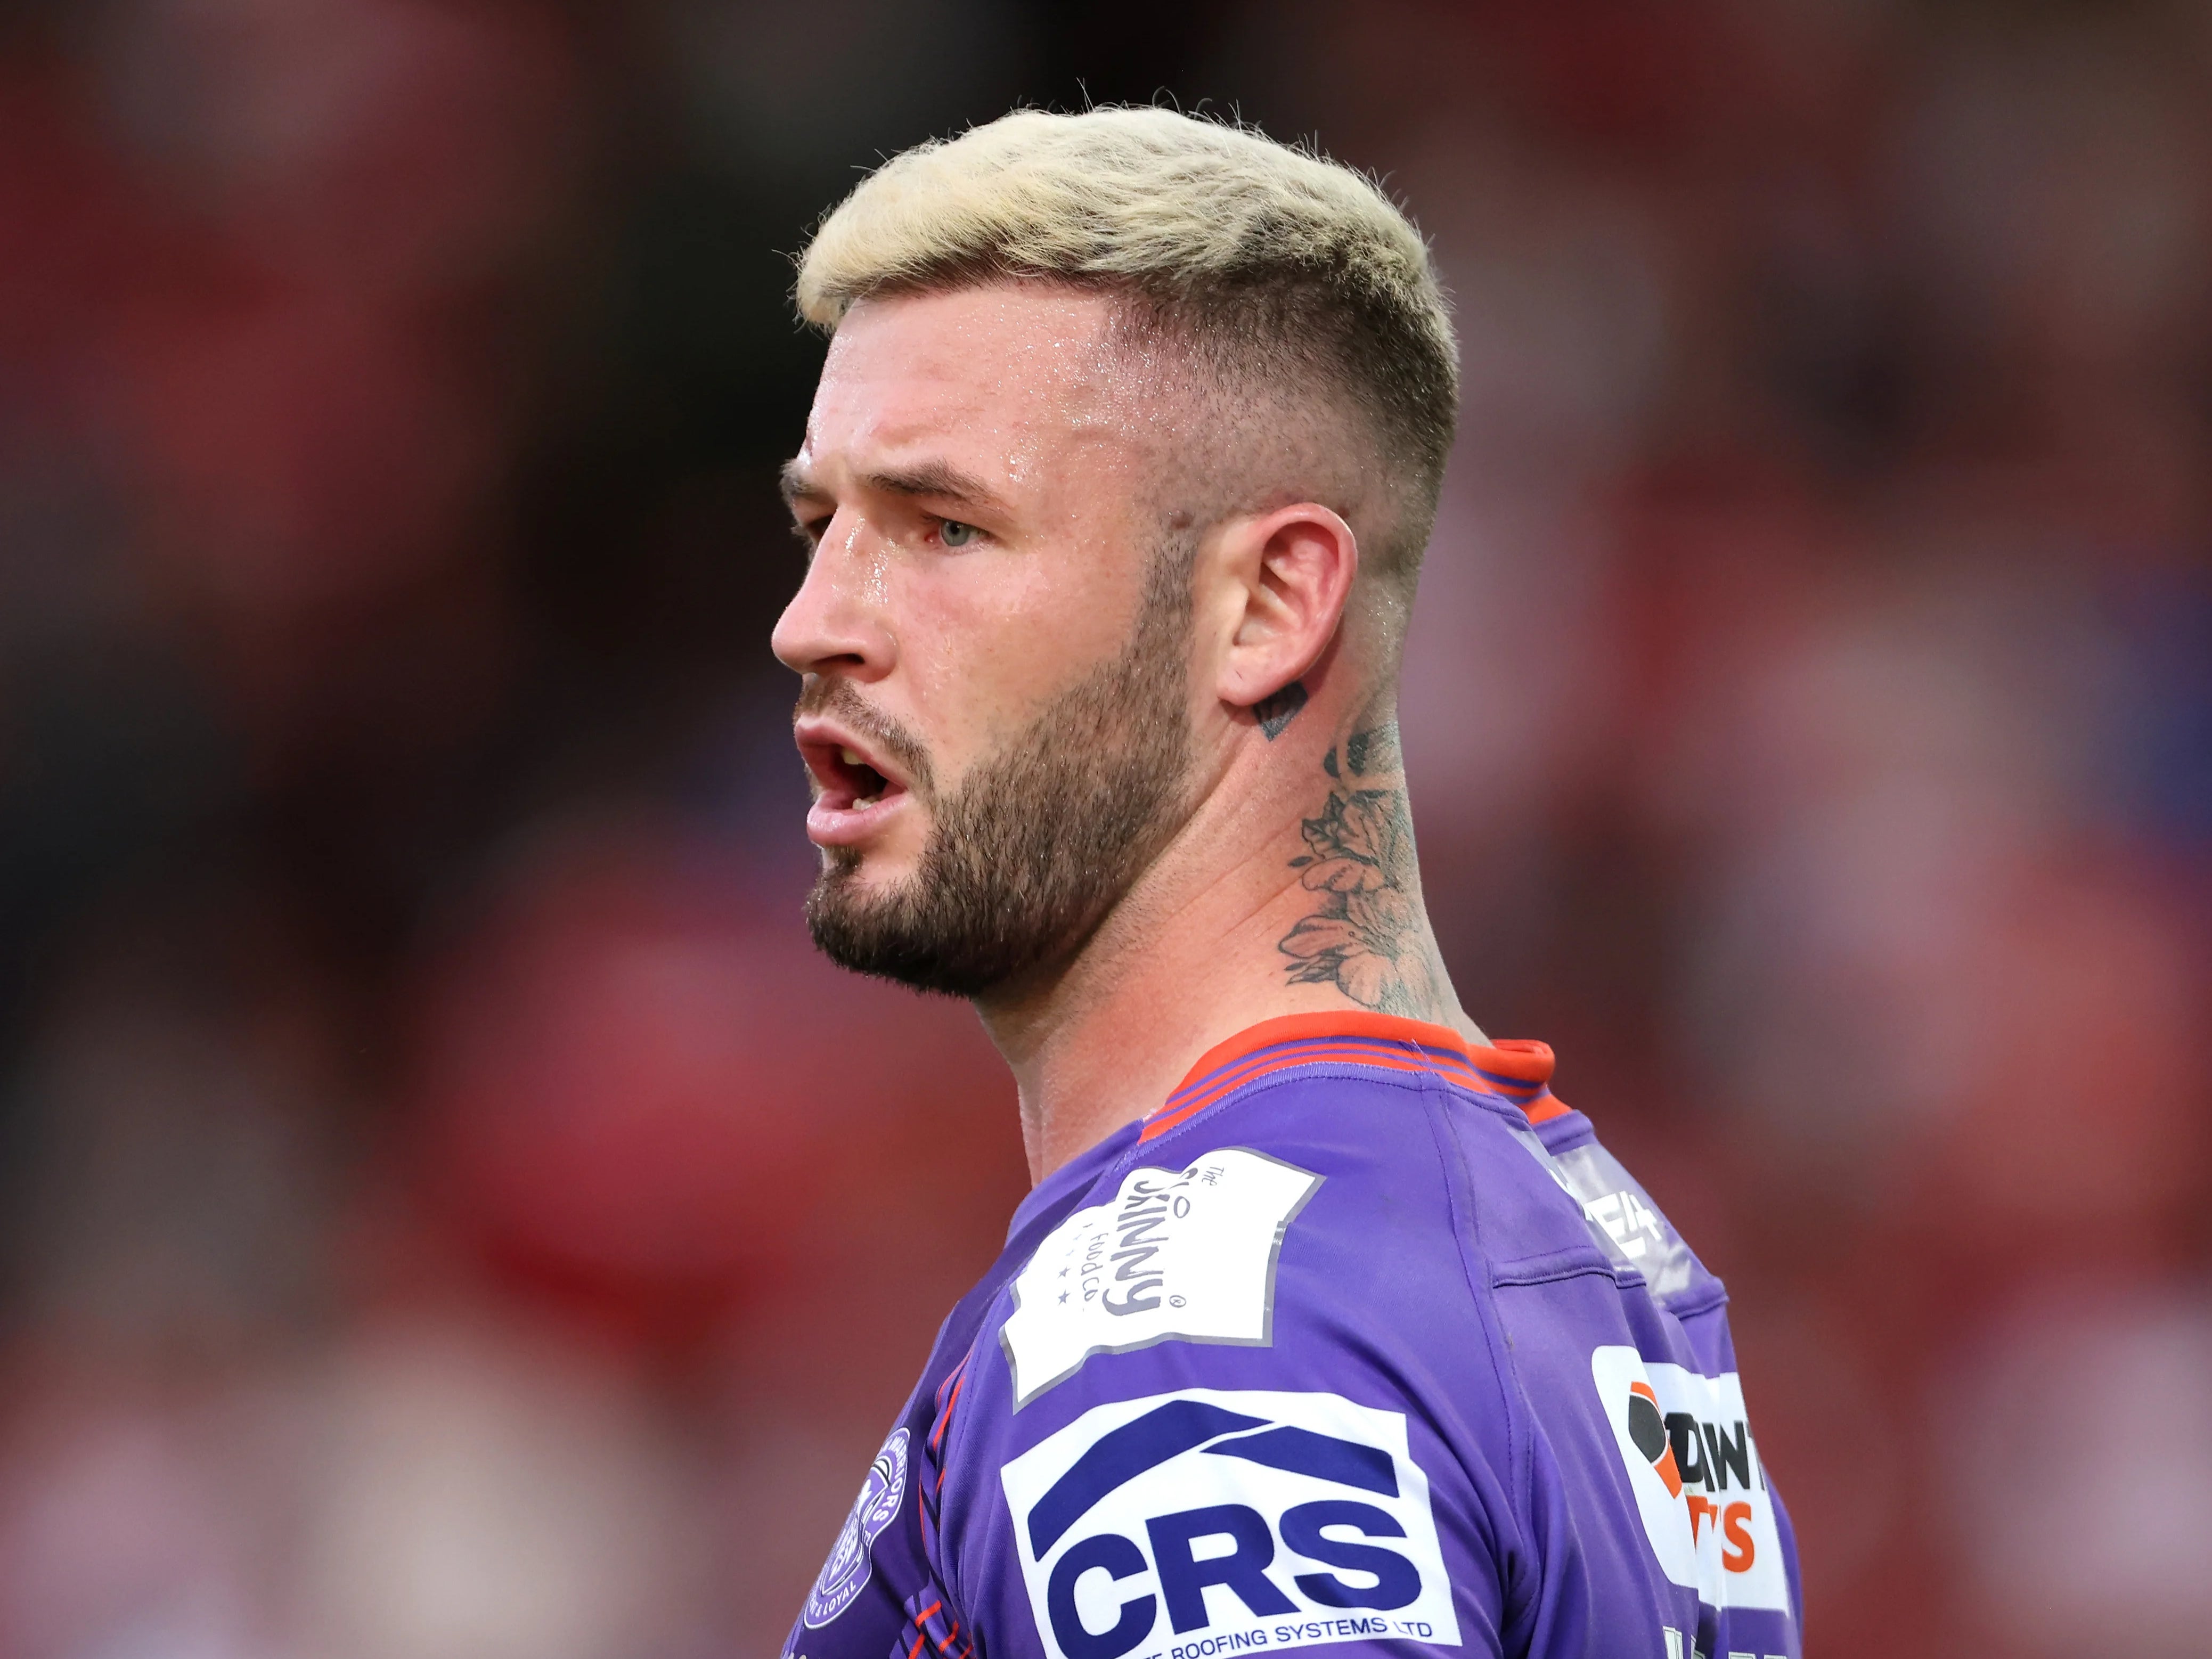 Former Wigan full-back Zak Hardaker will have to wait to make his return for Leeds after falling ill (PA Images/Richard Sellers)